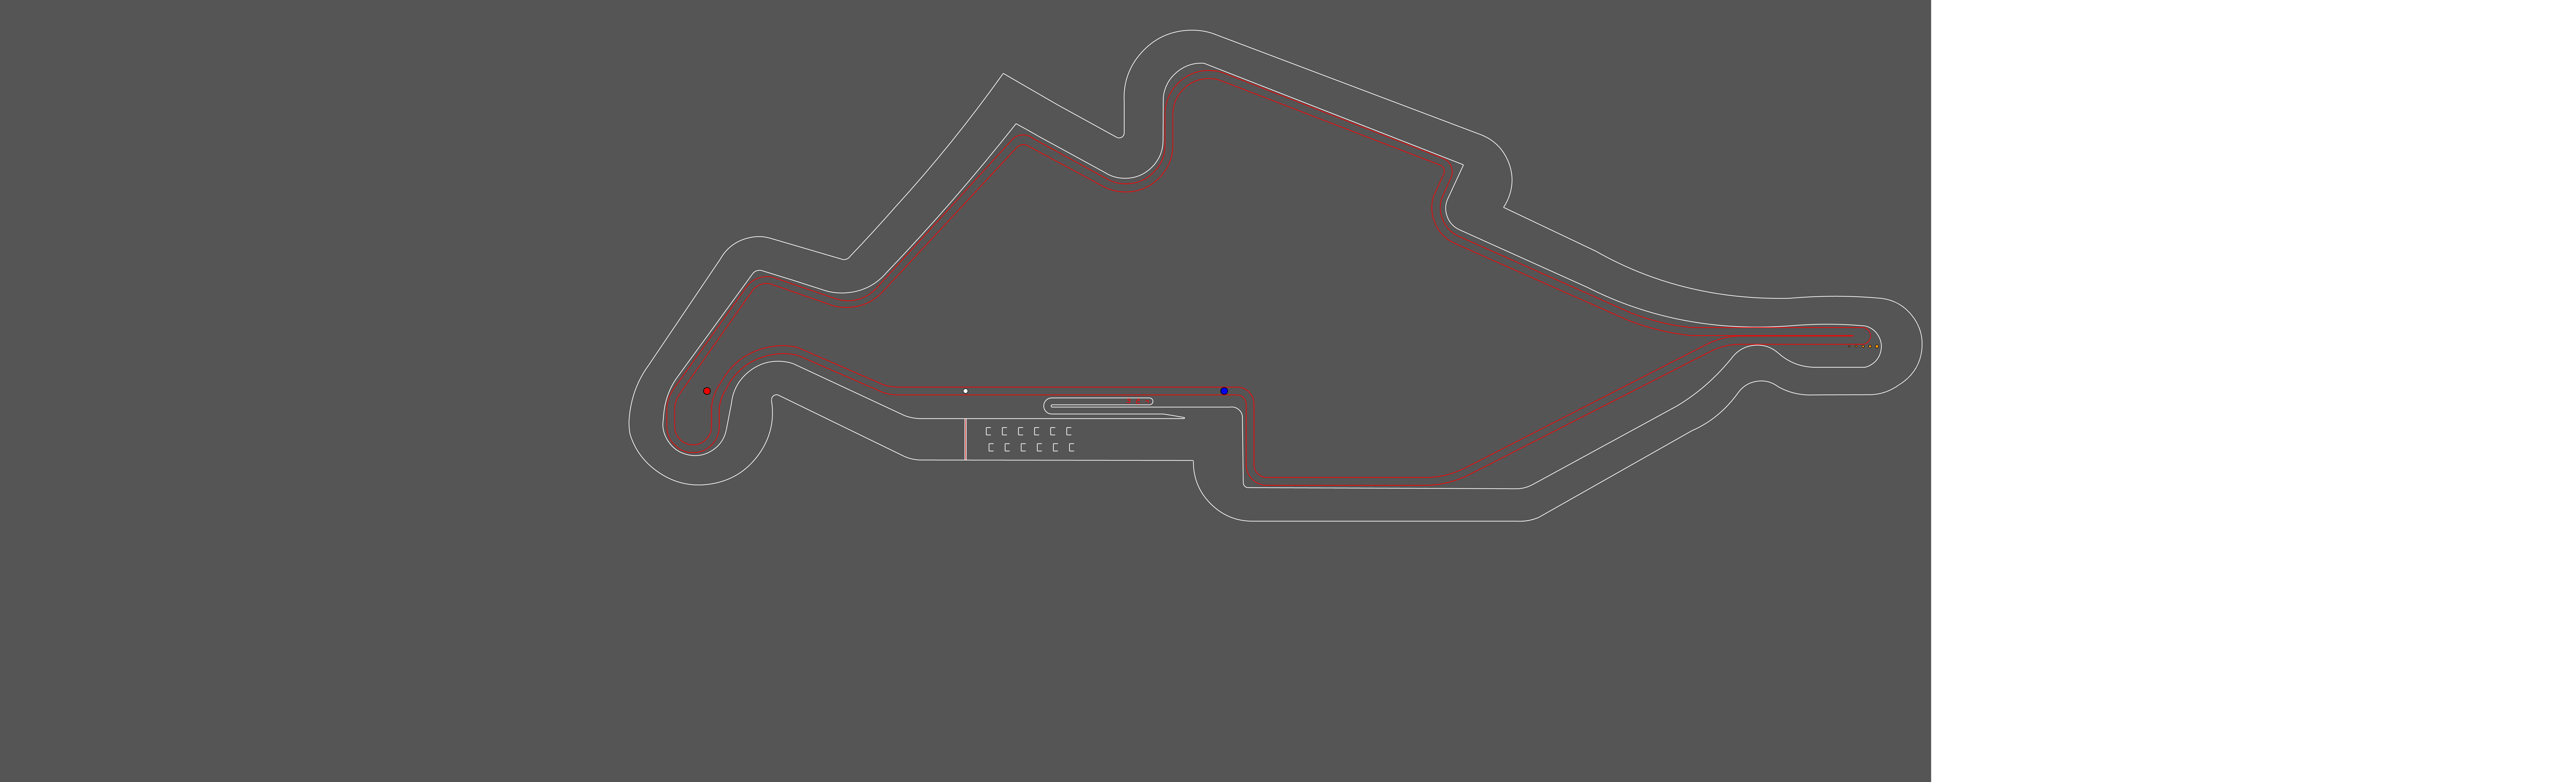 hax ball maps | Circuit of Italy